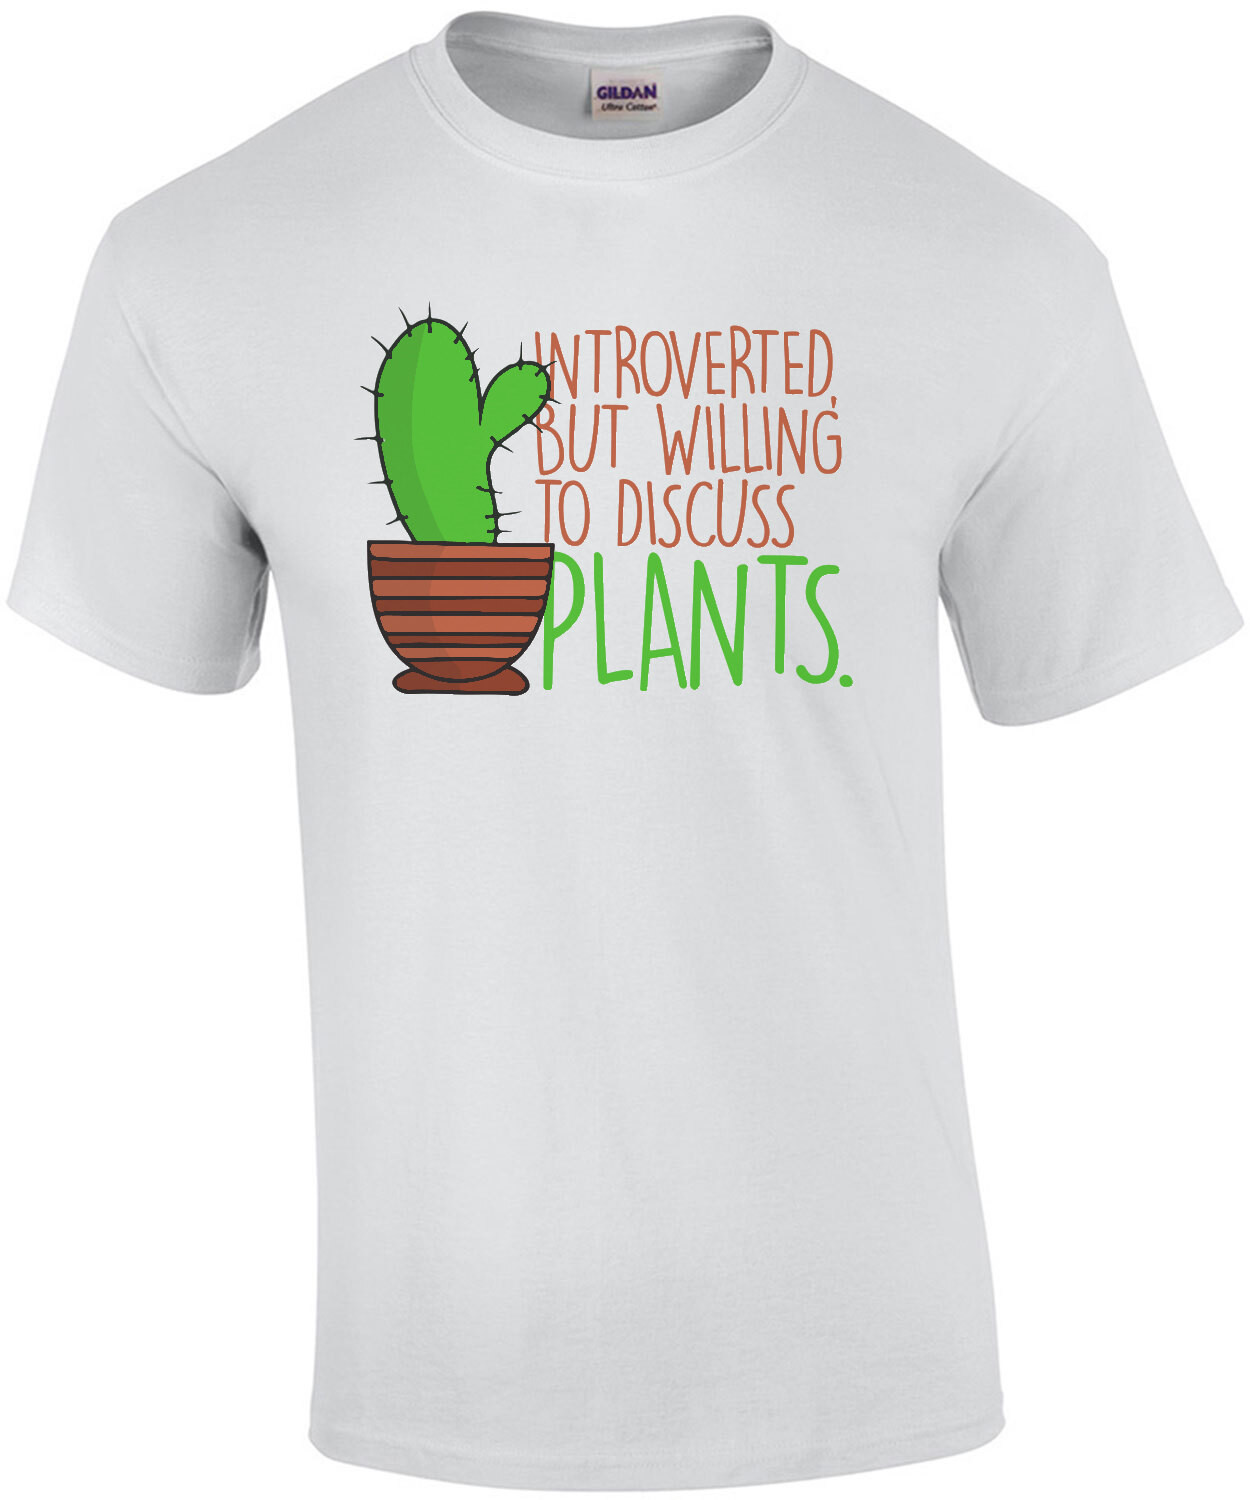 Introverted but willing to discuss plants - funny t-shirt